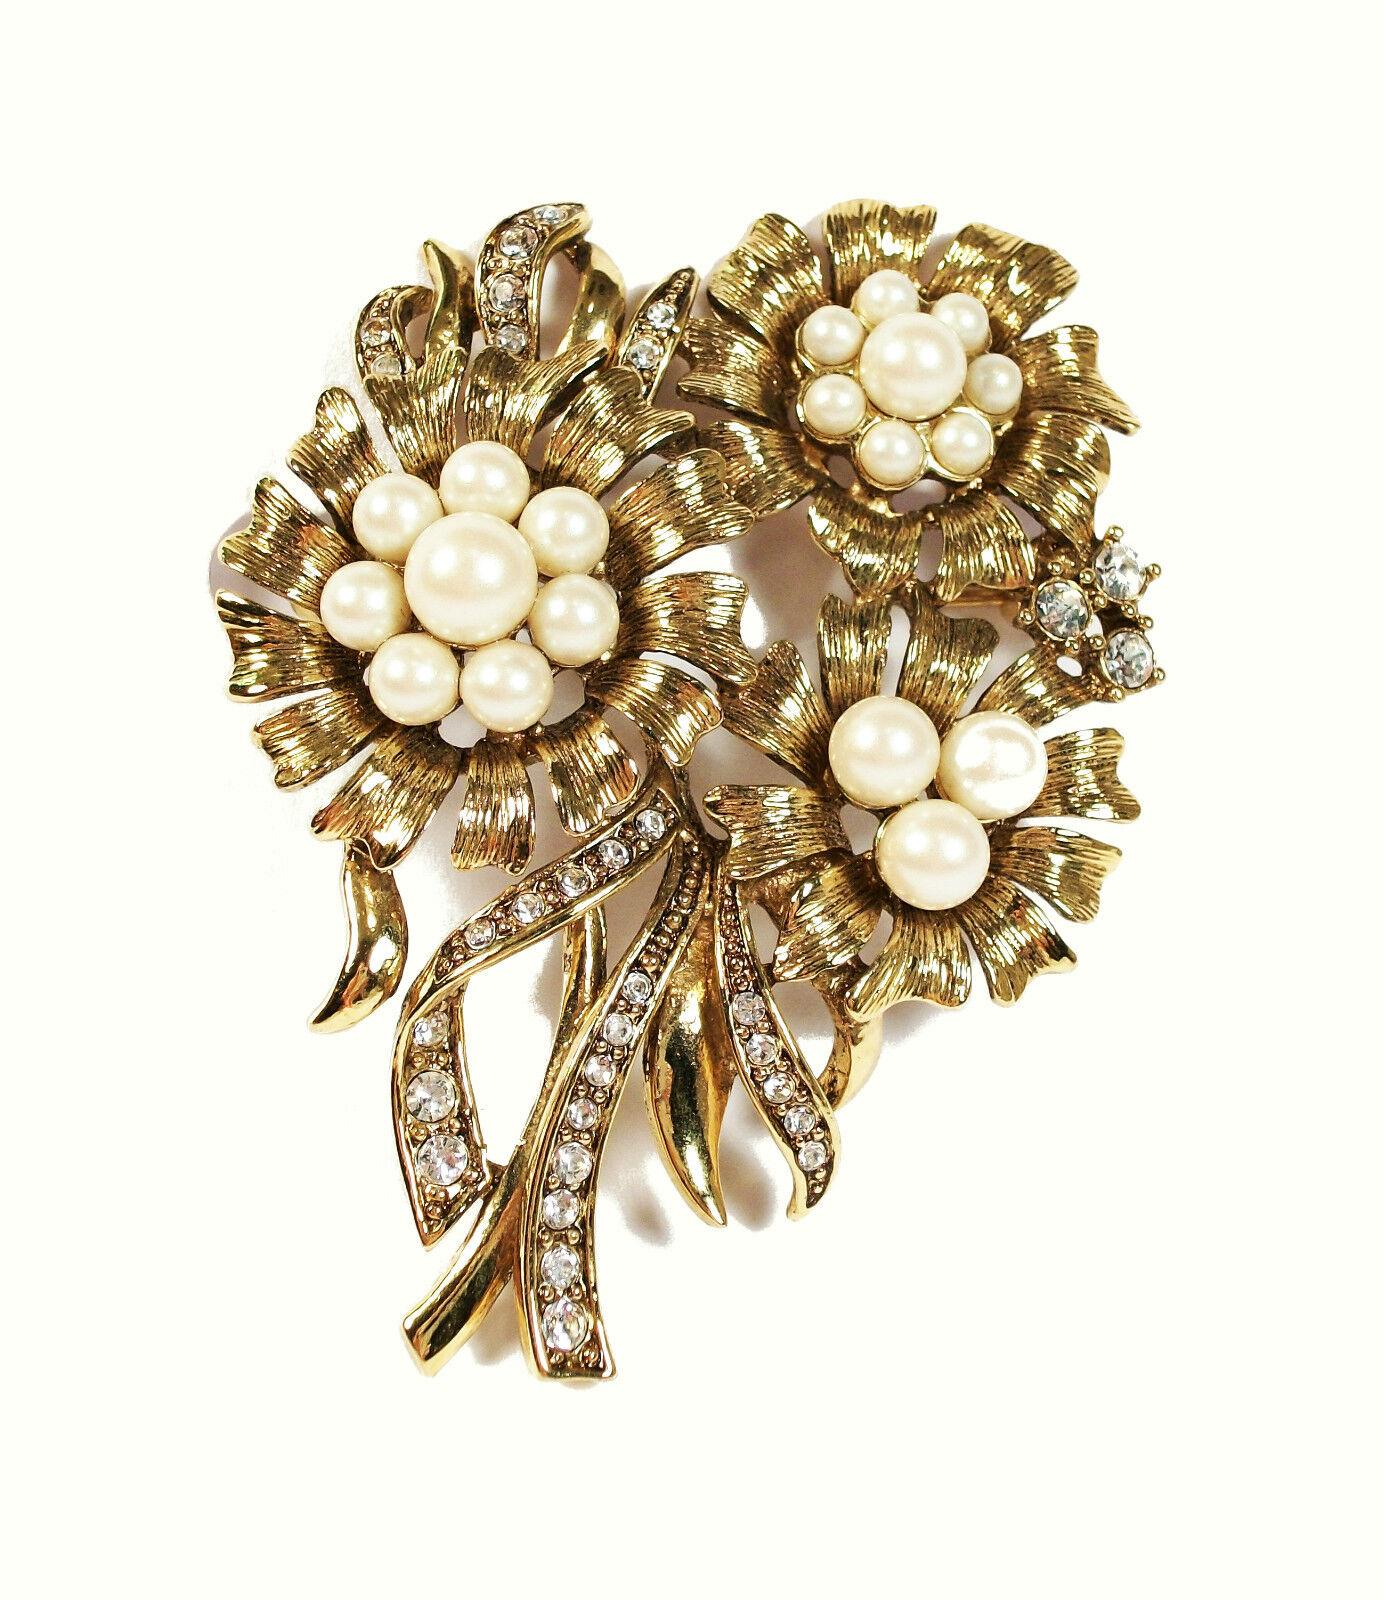 Contemporary MONET - Vintage Flower Brooch with Pearls & Rhinestones - Signed - Circa 1960's For Sale